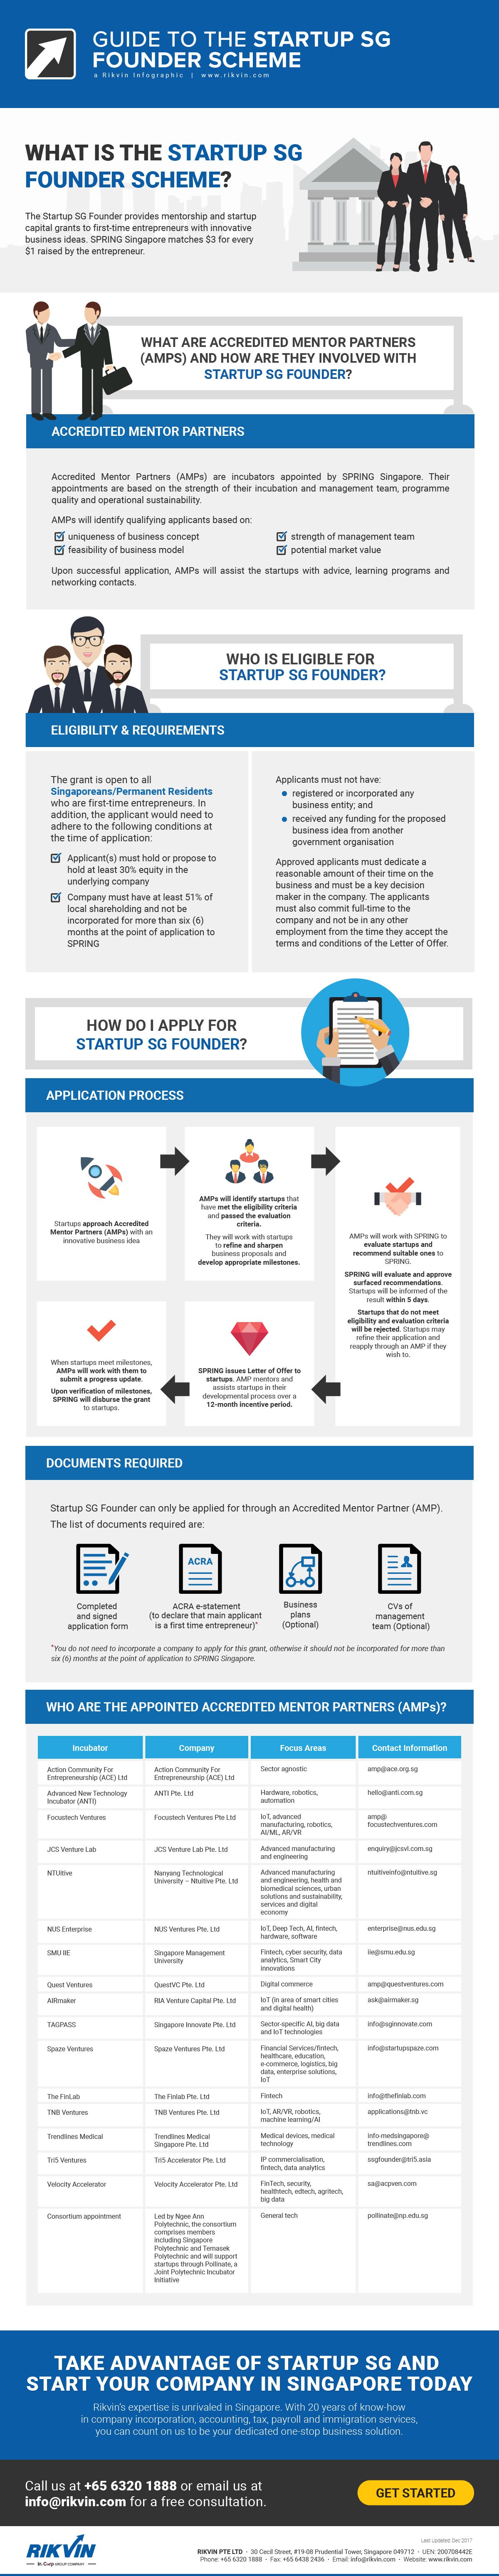 guide to the startup sg founder scheme